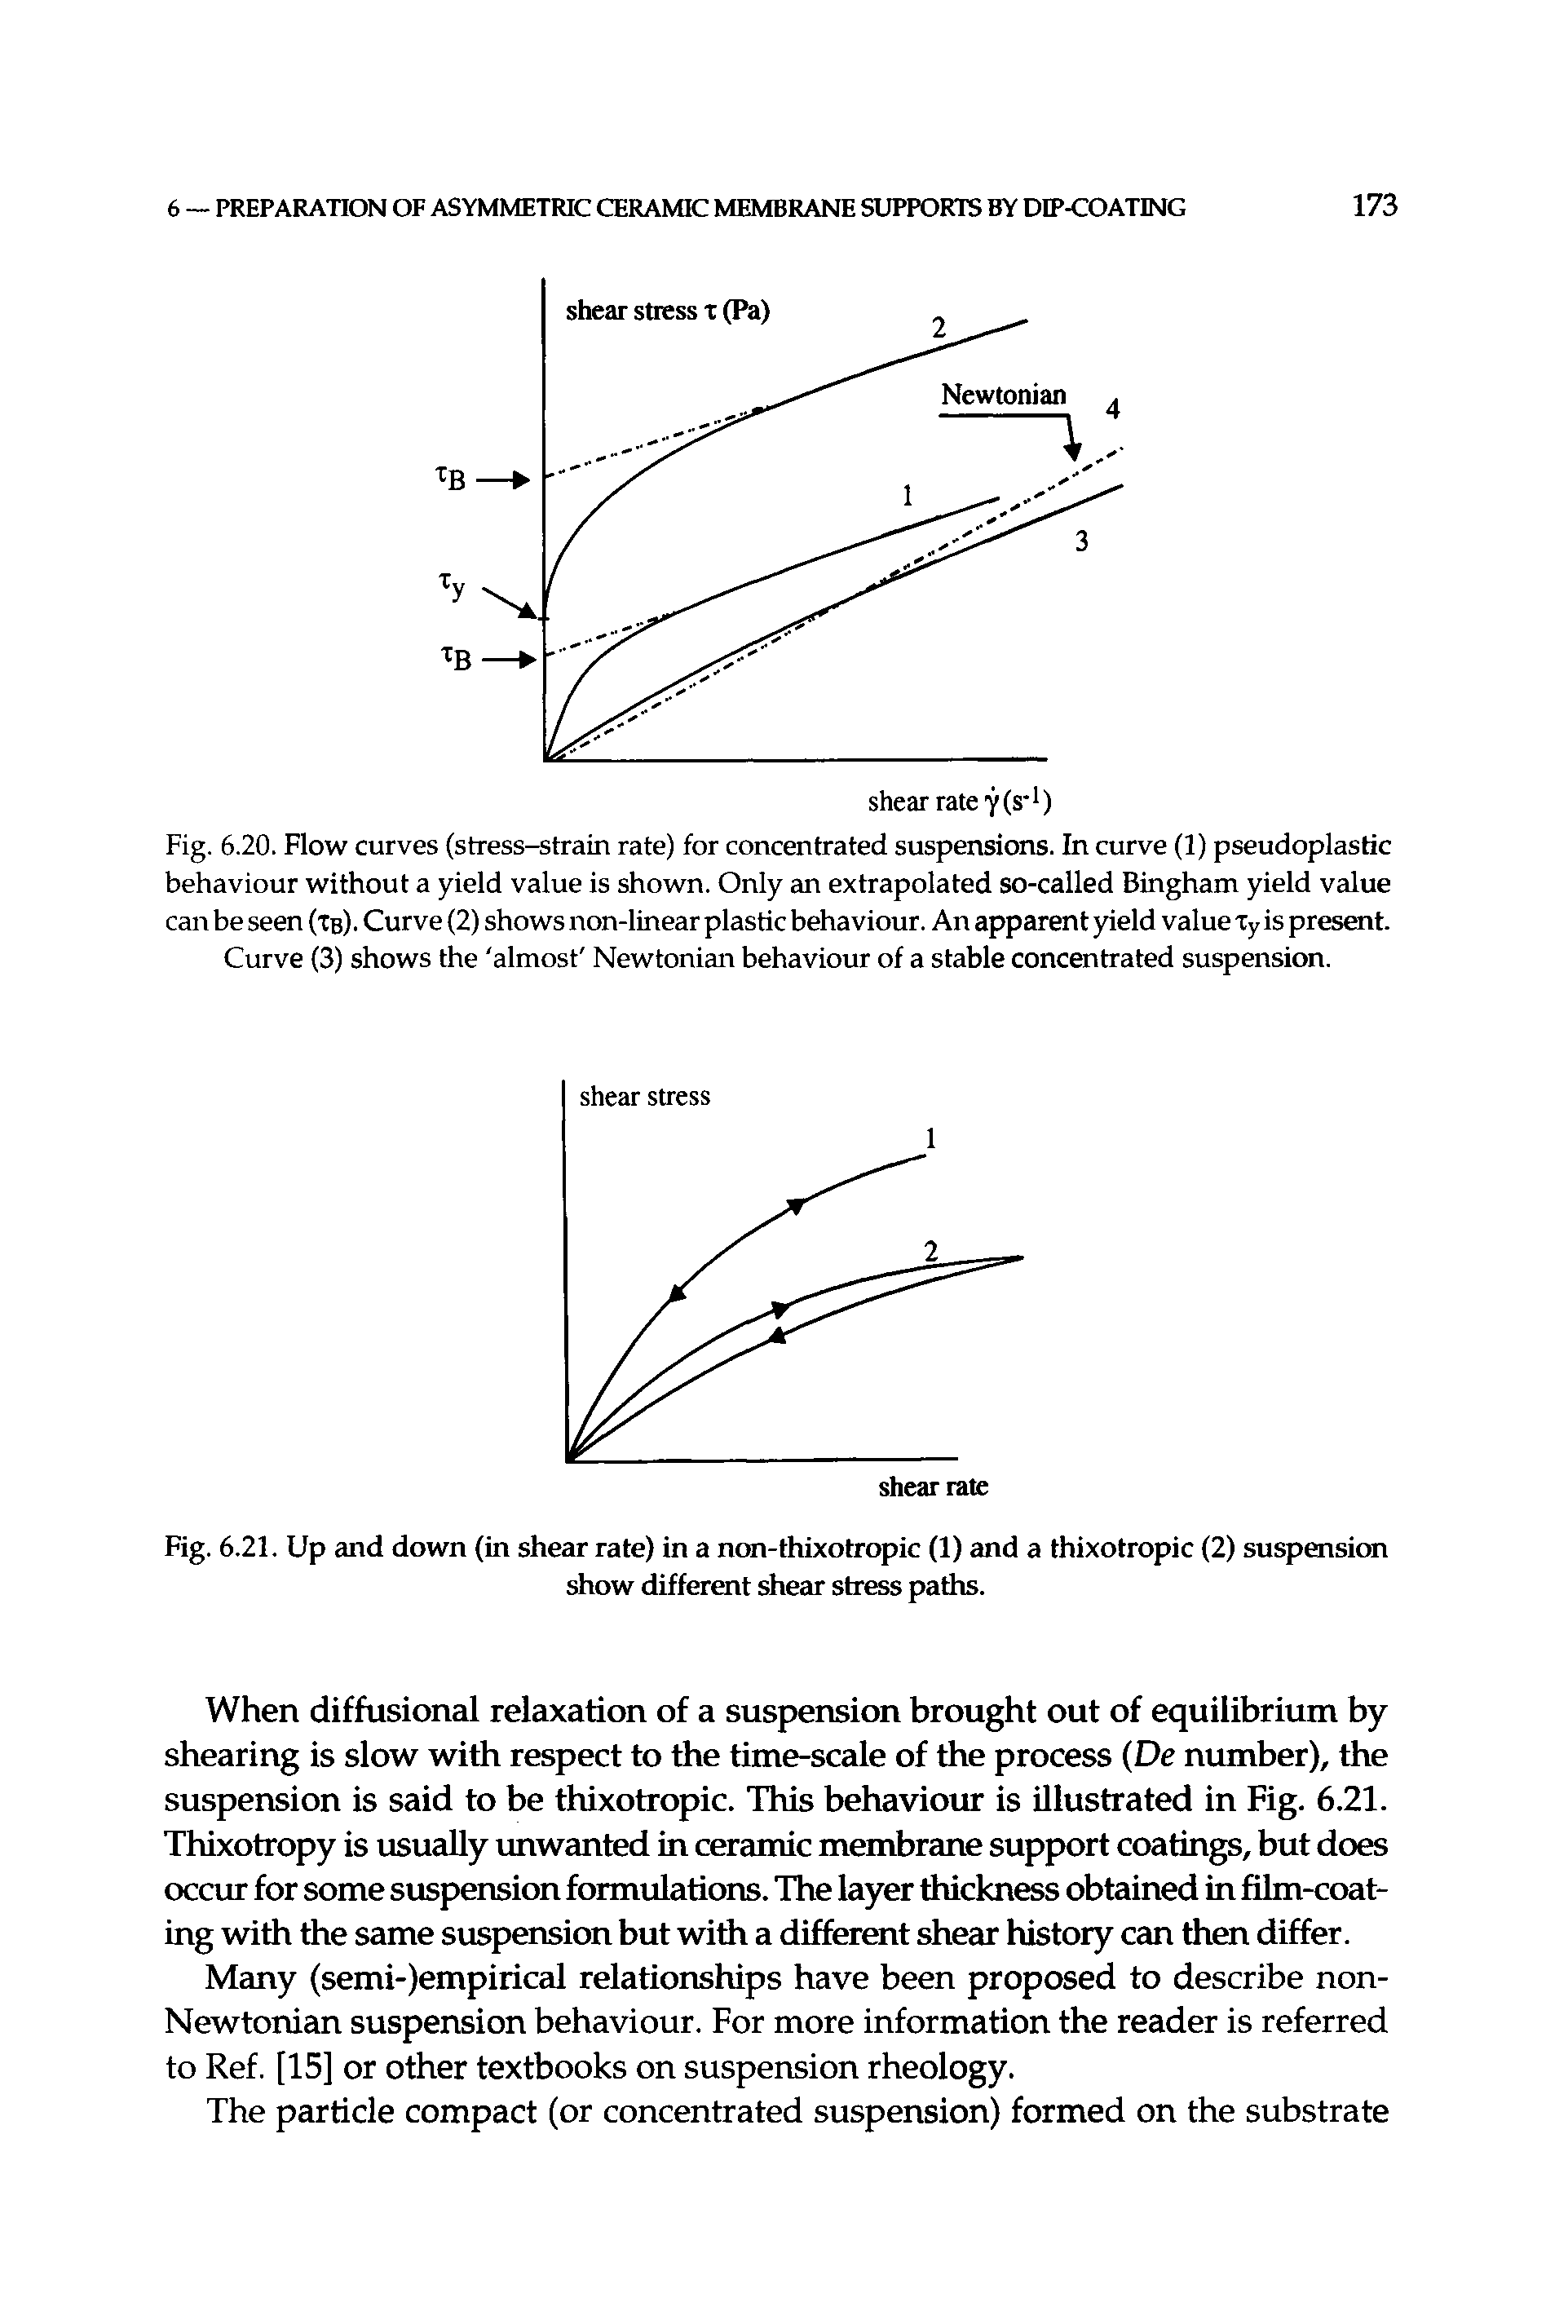 Fig. 6.20. Flow curves (stress-strain rate) for concentrated suspensions. In curve (1) pseudoplastic behaviour without a yield value is shown. Only an extrapolated so-called Bingham yield value can be seen (tb). Curve (2) shows non-linear plastic behaviour. An apparent yield value Xy is present. Curve (3) shows the almost Newtonian behaviour of a stable concentrated suspension.